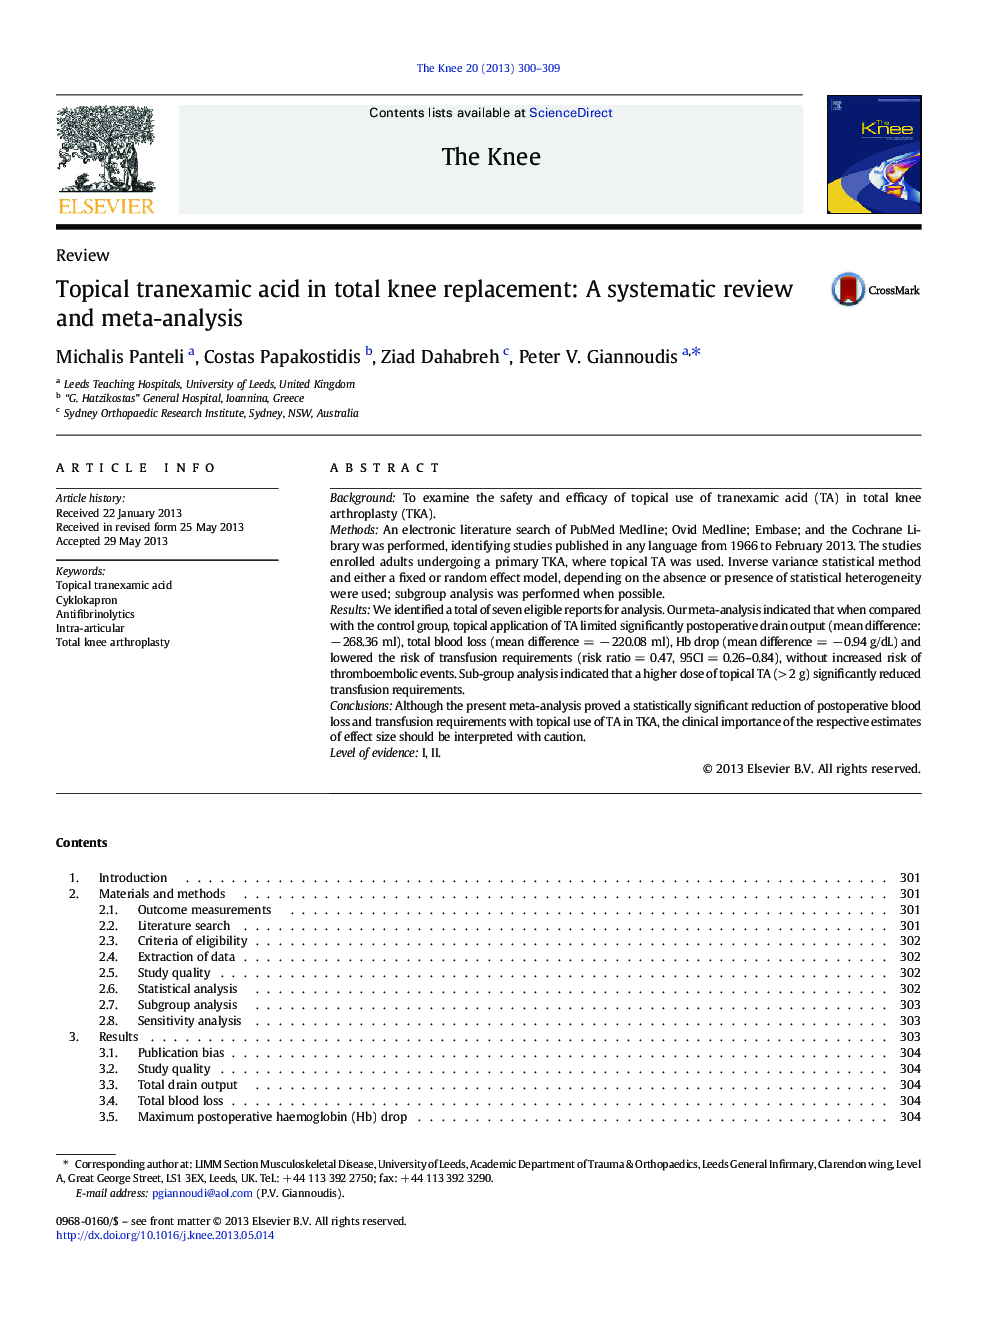 Topical tranexamic acid in total knee replacement: A systematic review and meta-analysis